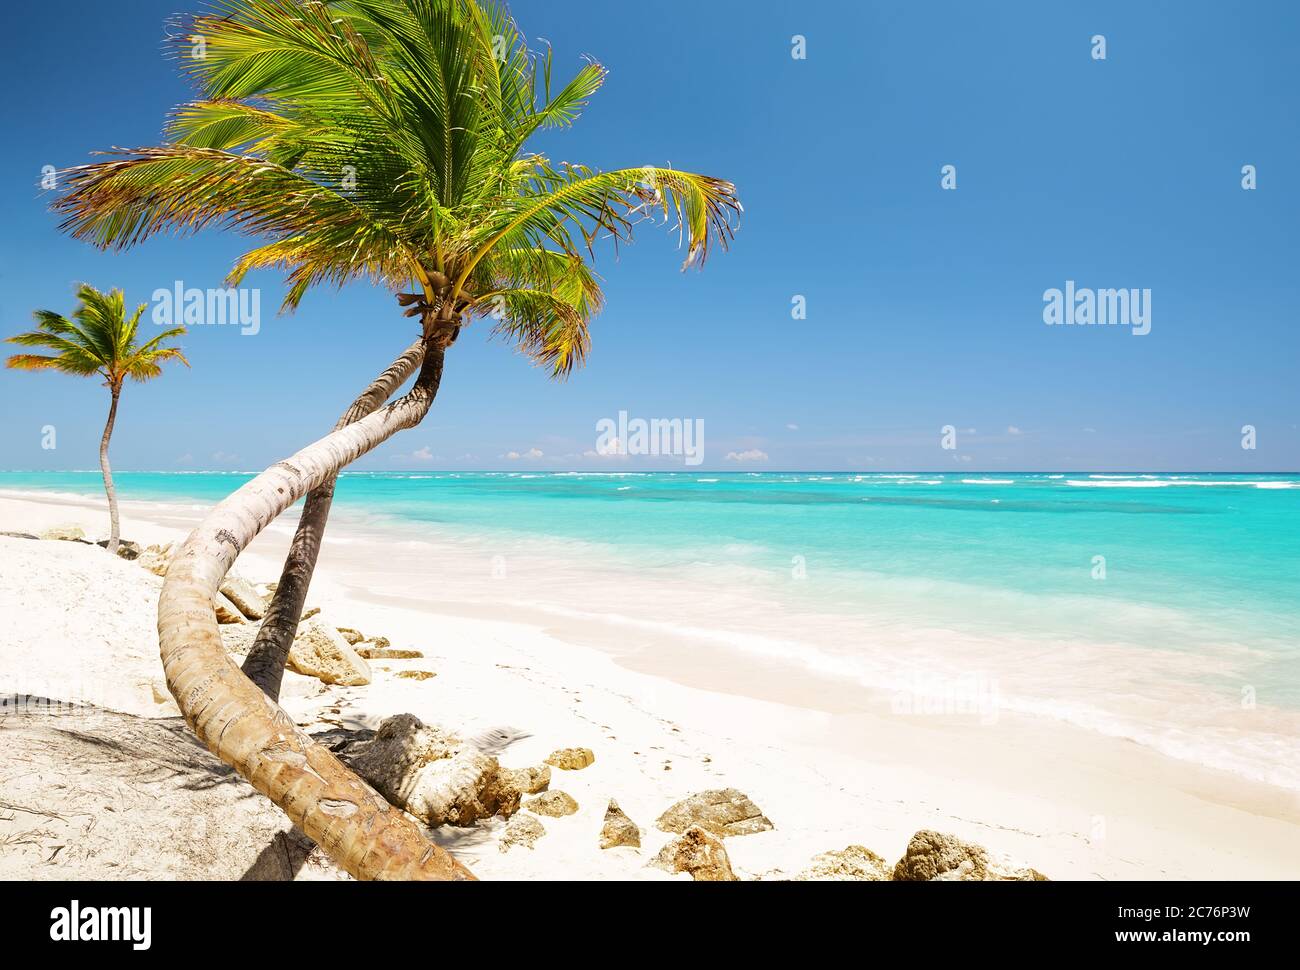 Coconut Palm trees on white sandy beach in Punta Cana, Dominican Republic Stock Photo